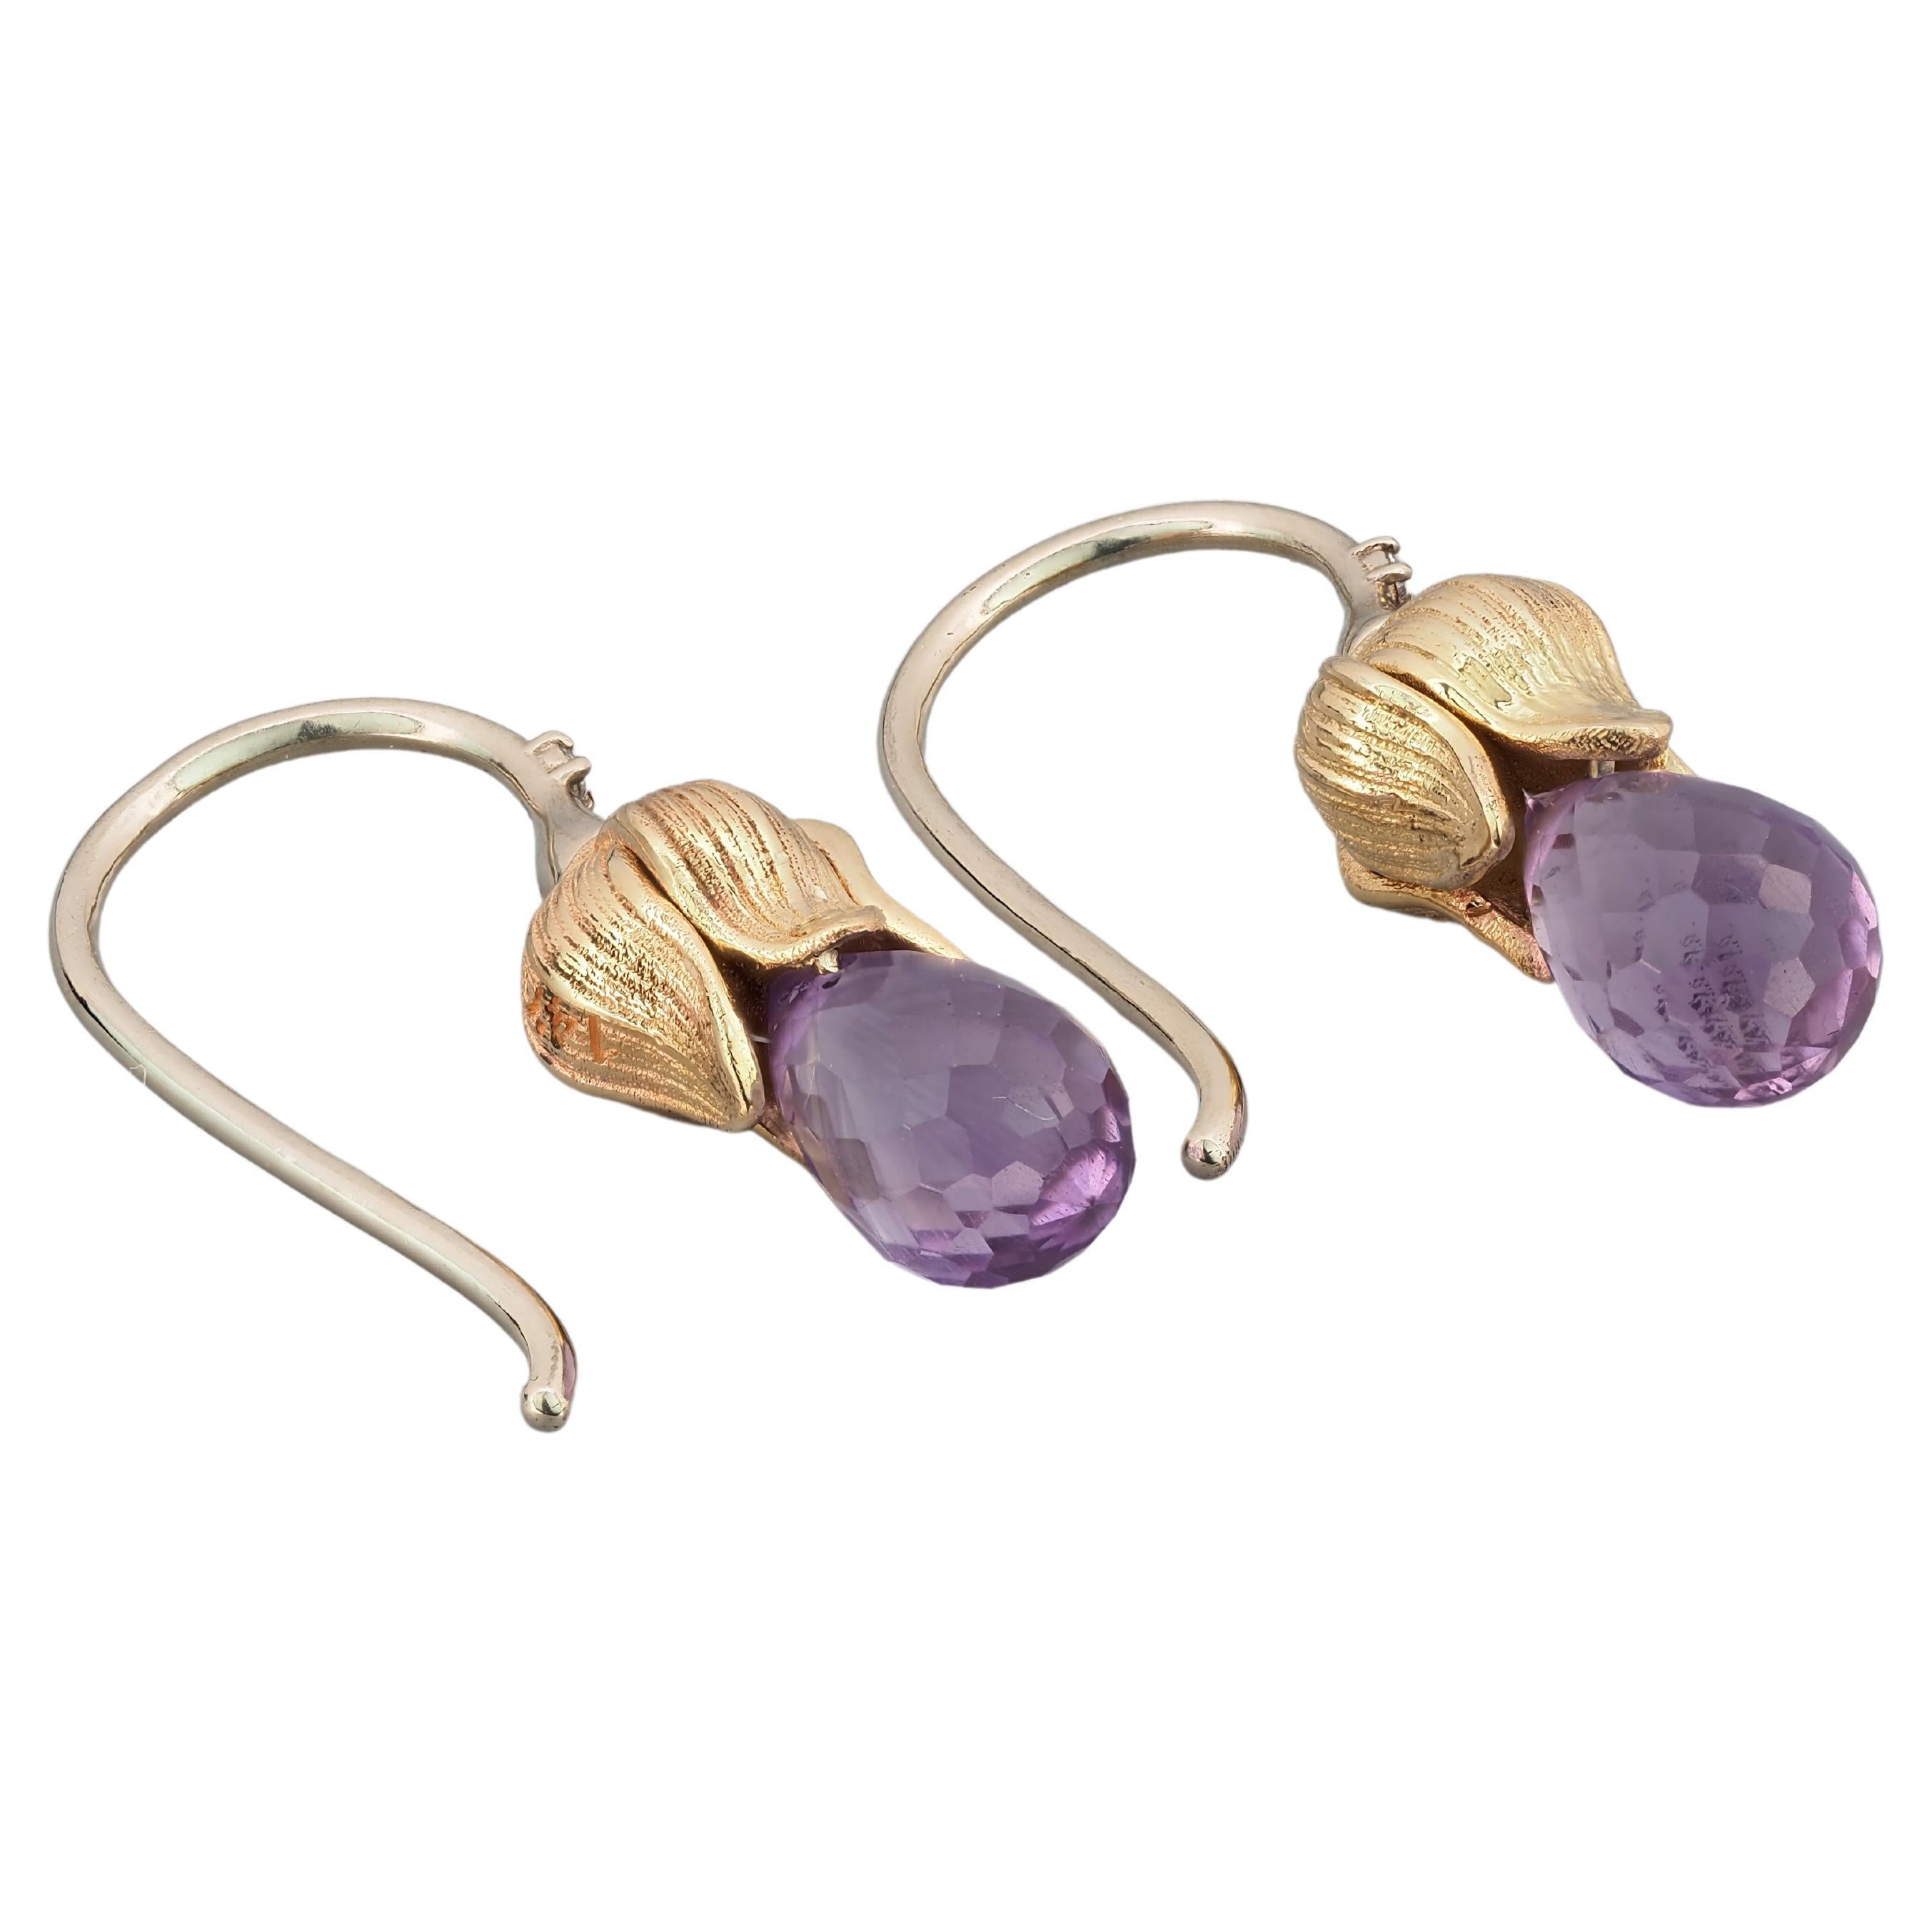 Flower design earrings with natural amethysts and diamonds. Gold color yellow and white - 14k marked. February birthstone. 
Size: 21 x 6 mm.
Weight: 2.55 g.

Gemstones:
Natural amethysts: 2 pieces, approx - 2.00 ct total, violet color.
Briolette